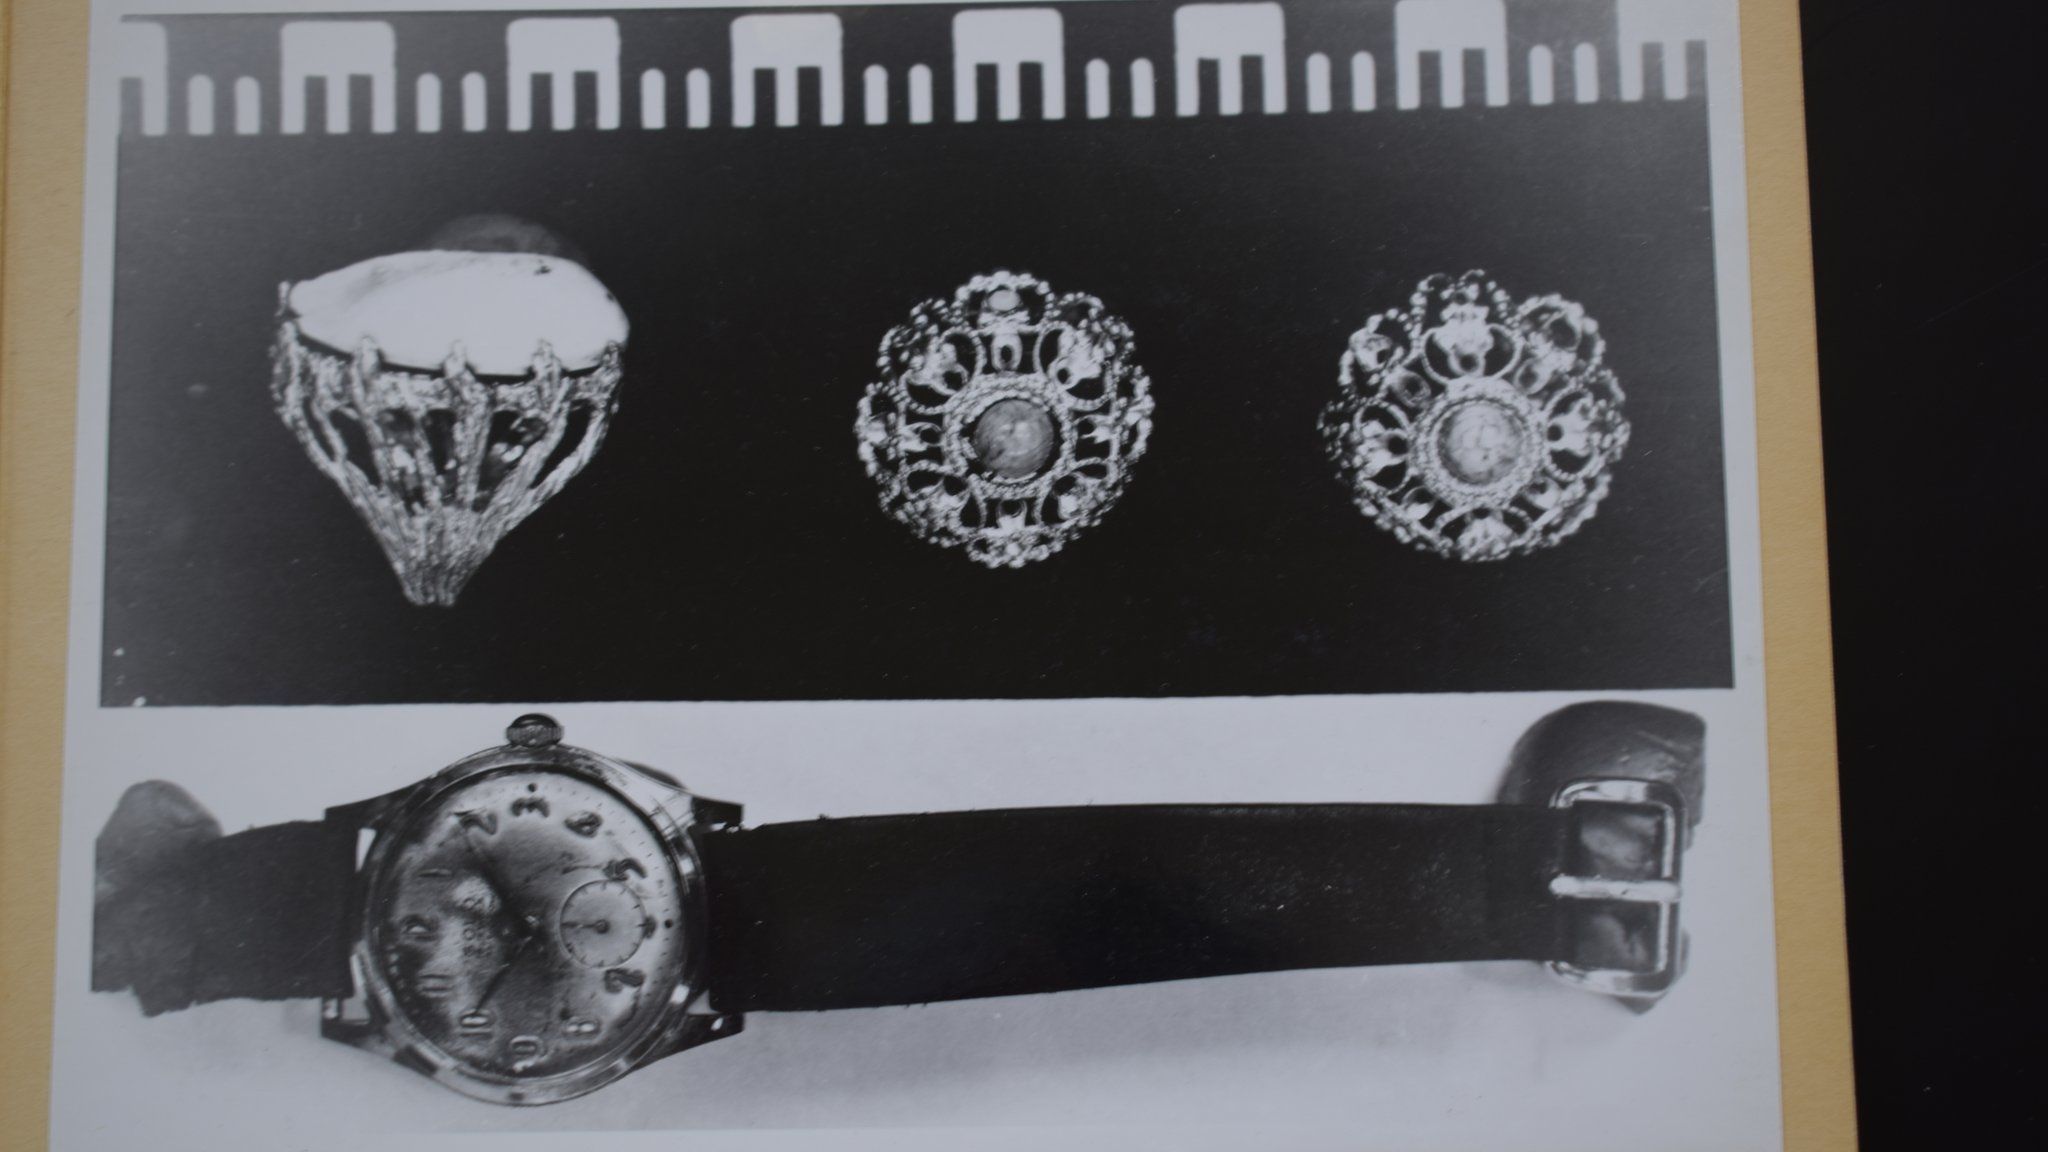 Photo from Bergen State Archives showing jewellery and a watch found near the body of the Isdal Woman